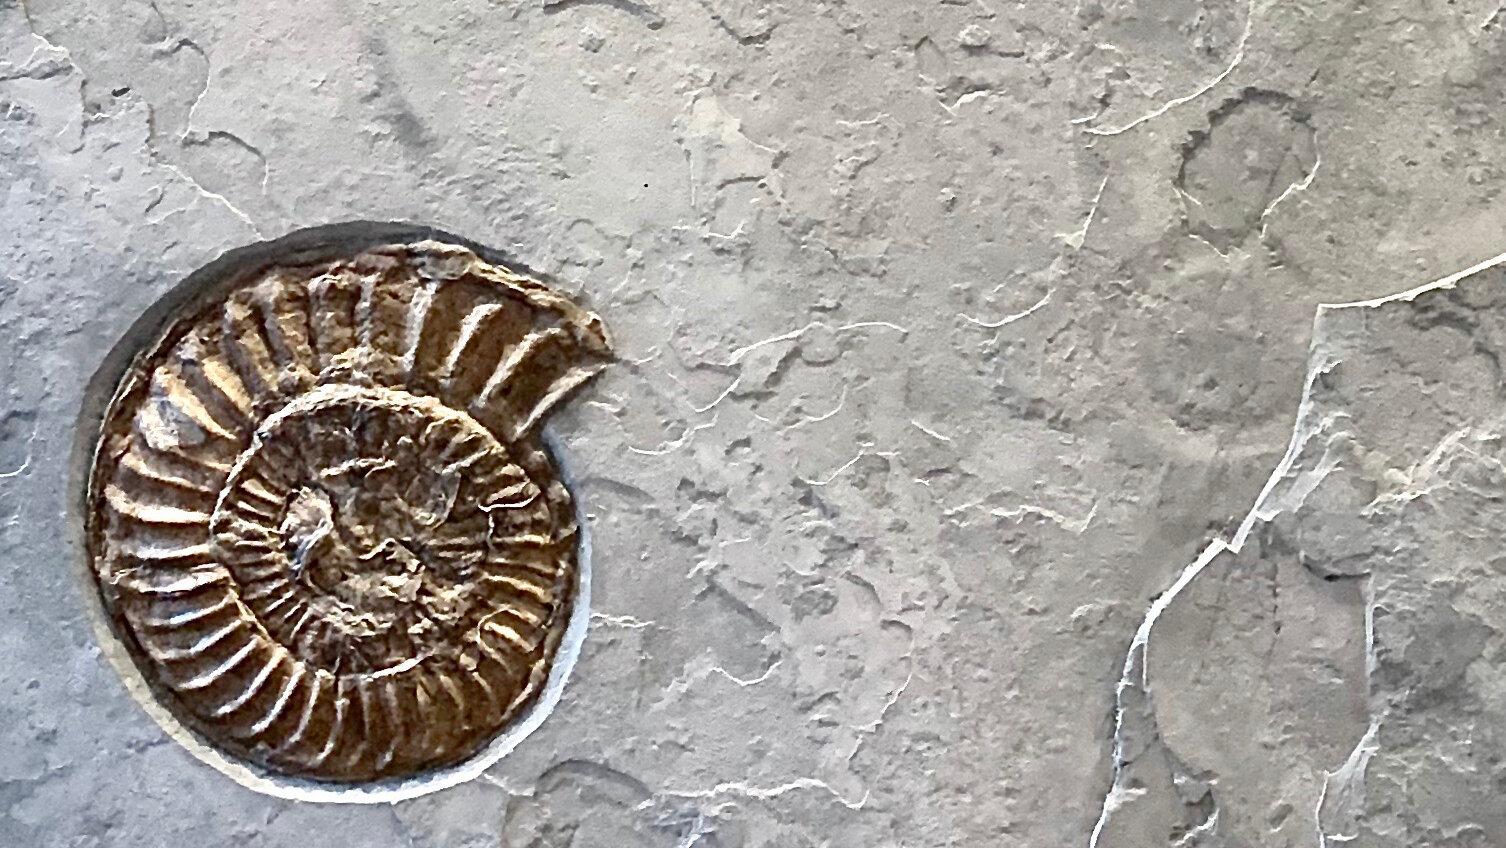 Fossilised Ammonite wall plate with oysters from the Jurassic Coast, Dorset. 

'Ammonoidea'
Permian  (298-252 million years ago)
148 x 103 x 5 cm
Jurassic Coast, Dorset, UK 

Dimensions: 148 x 103 x 5 cm